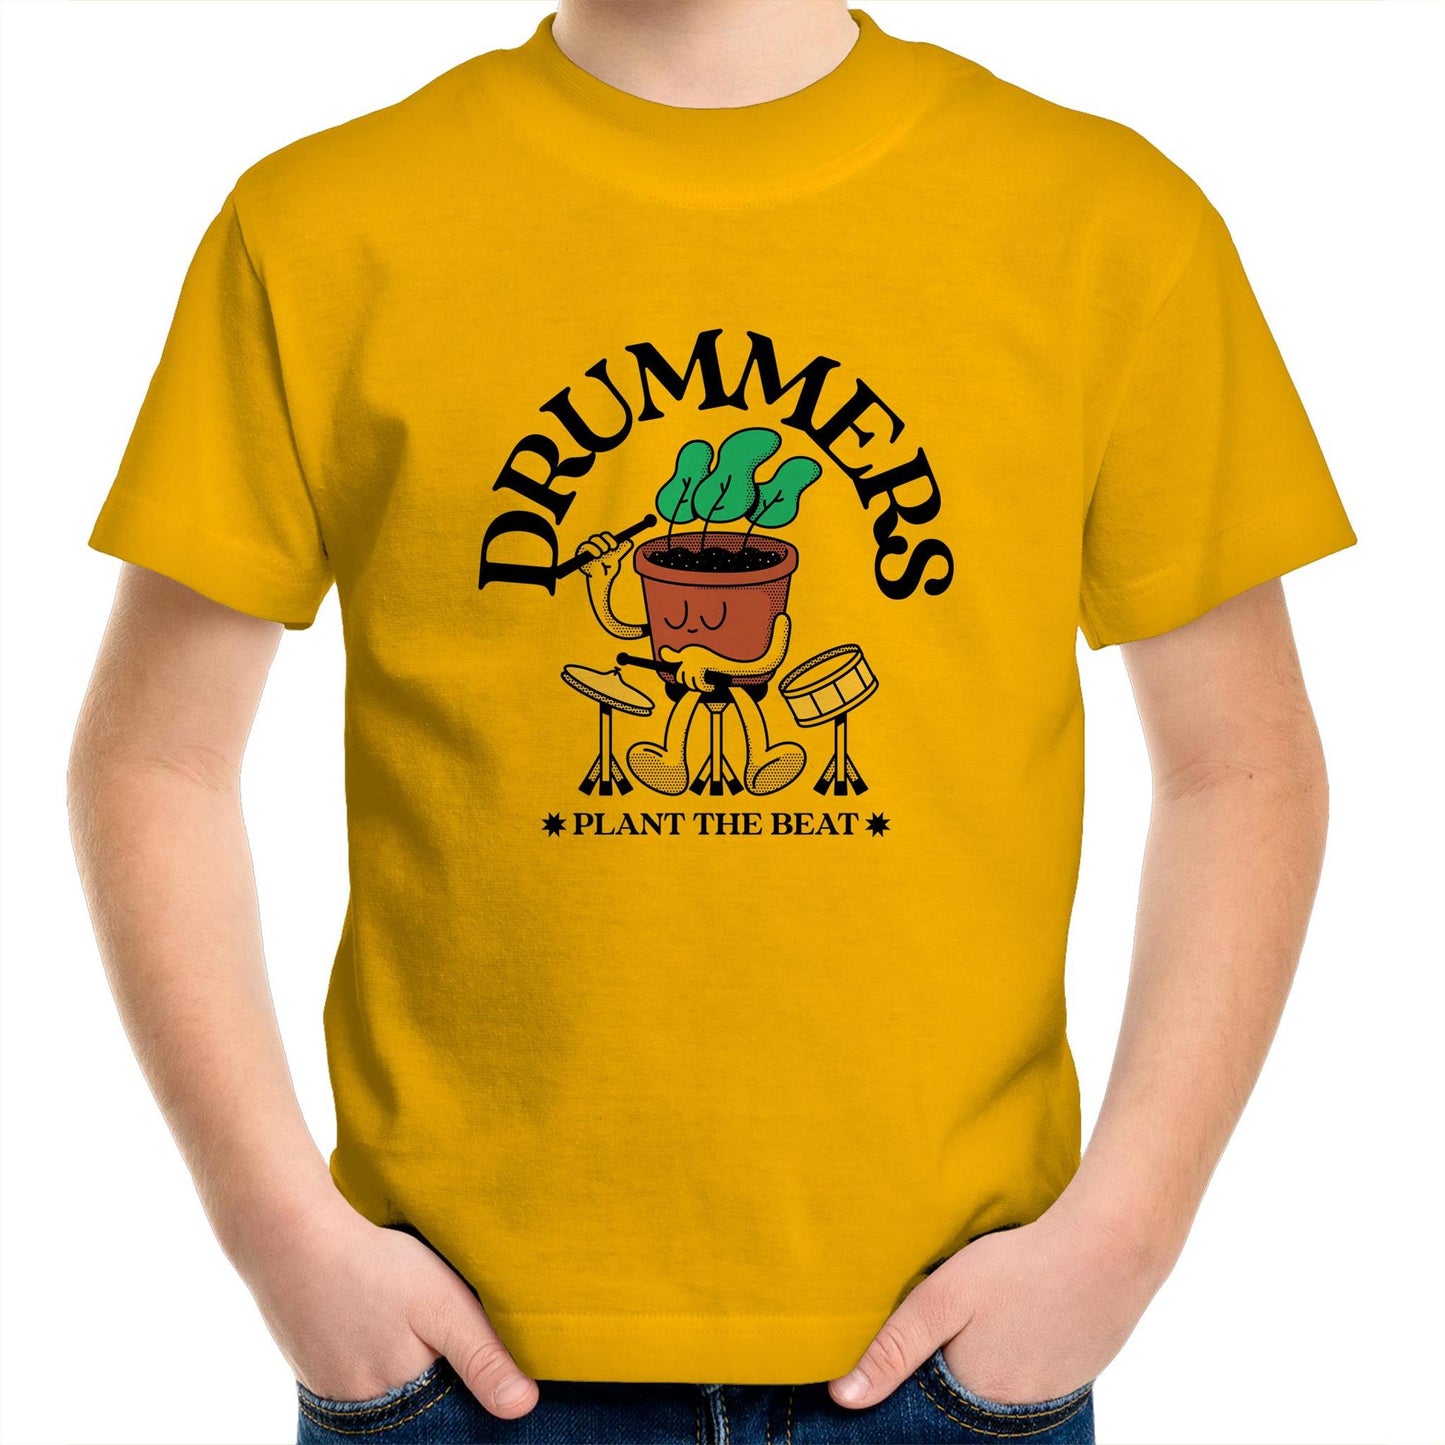 Drummers - Kids Youth Crew T-Shirt Gold Kids Youth T-shirt Music Plants